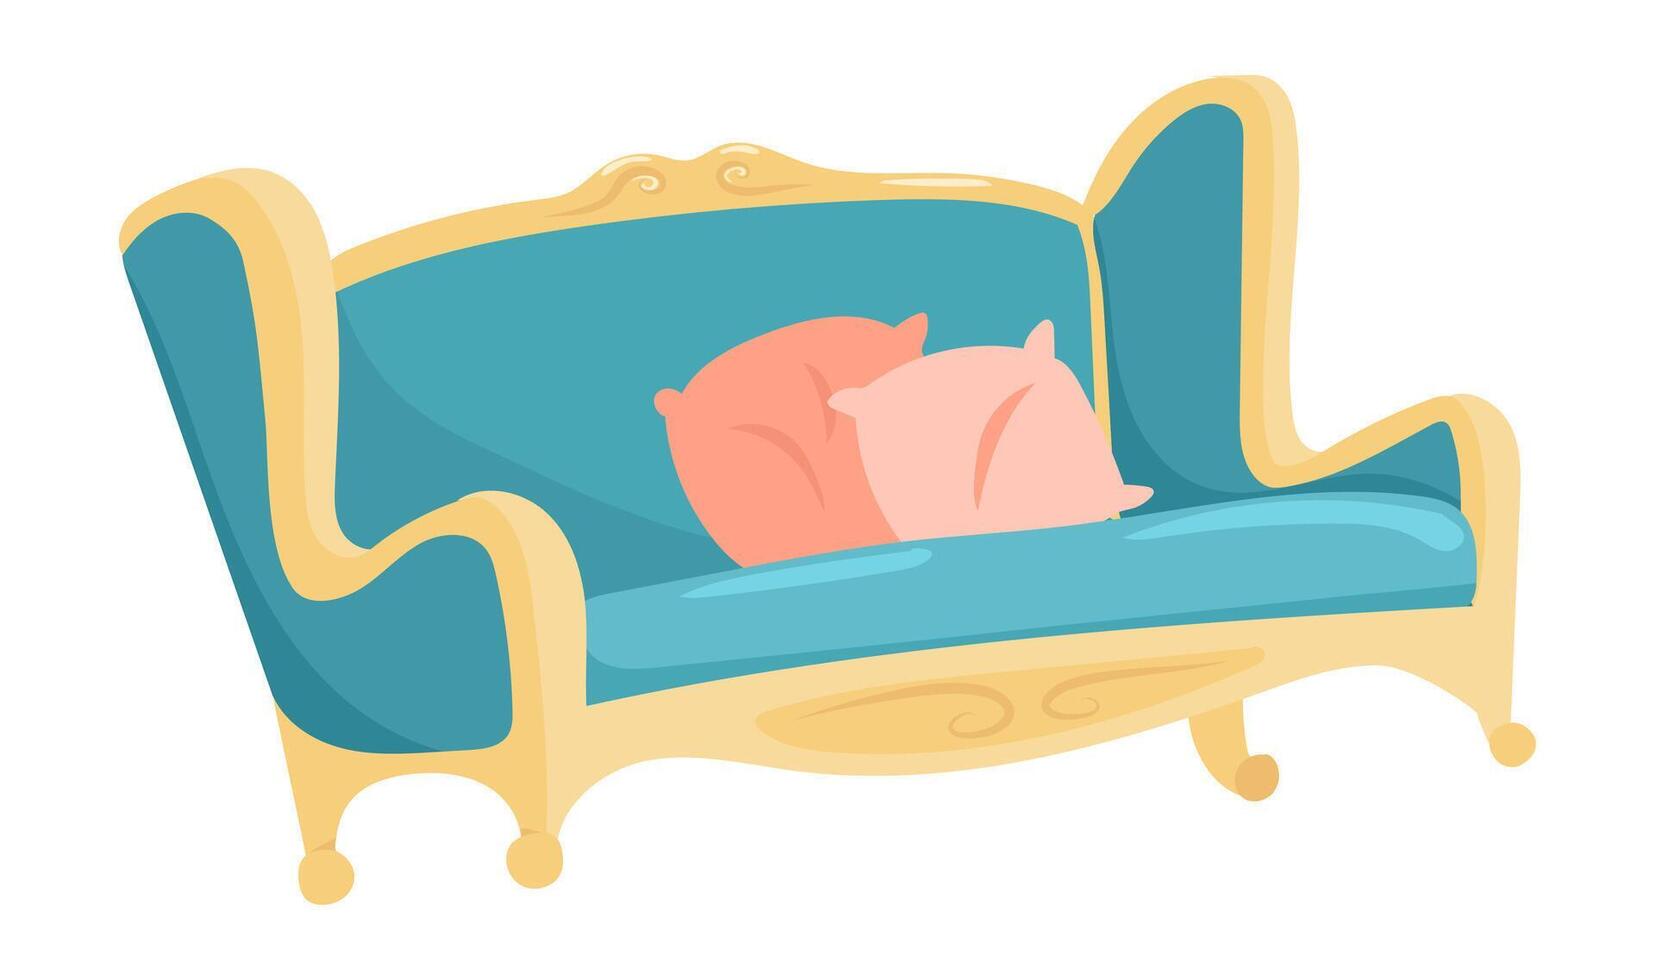 Royal sofa with cushions in flat design. Luxury vintage couch with pillows. illustration isolated. vector